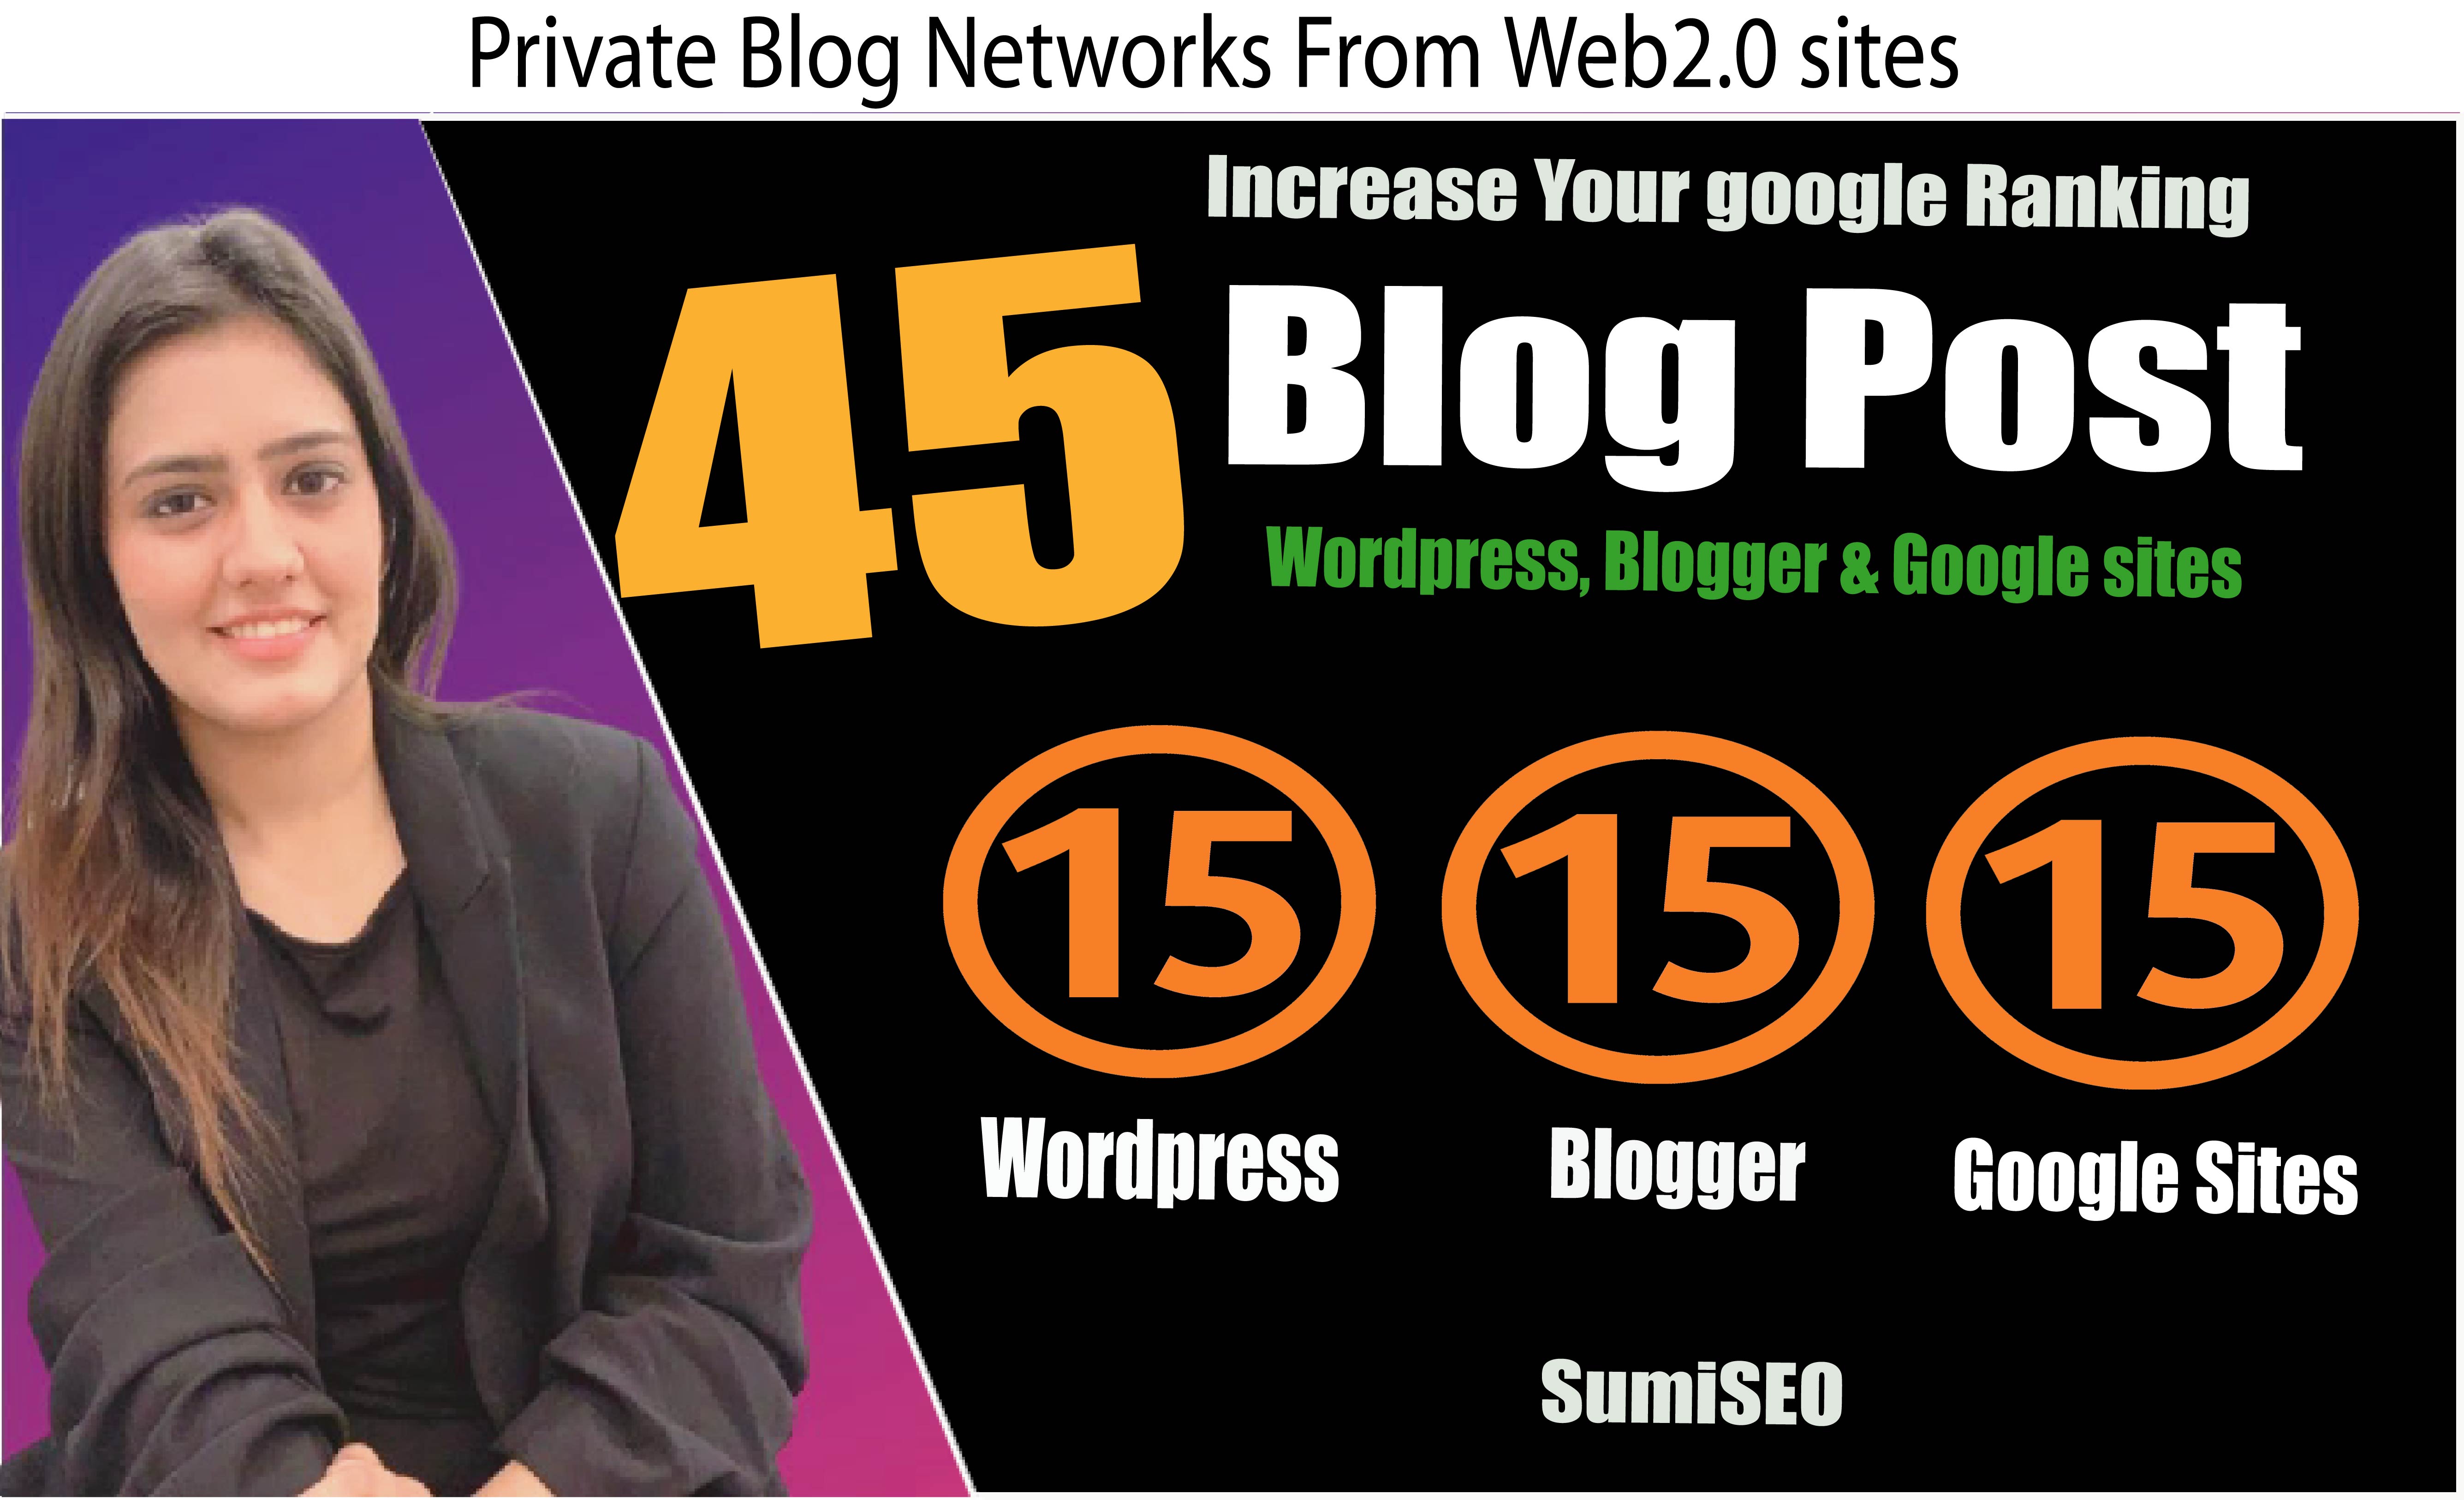 45 Private Blog Post From Authority Sites, Wordpress, Blogger & Google Sites, Increase Ranking